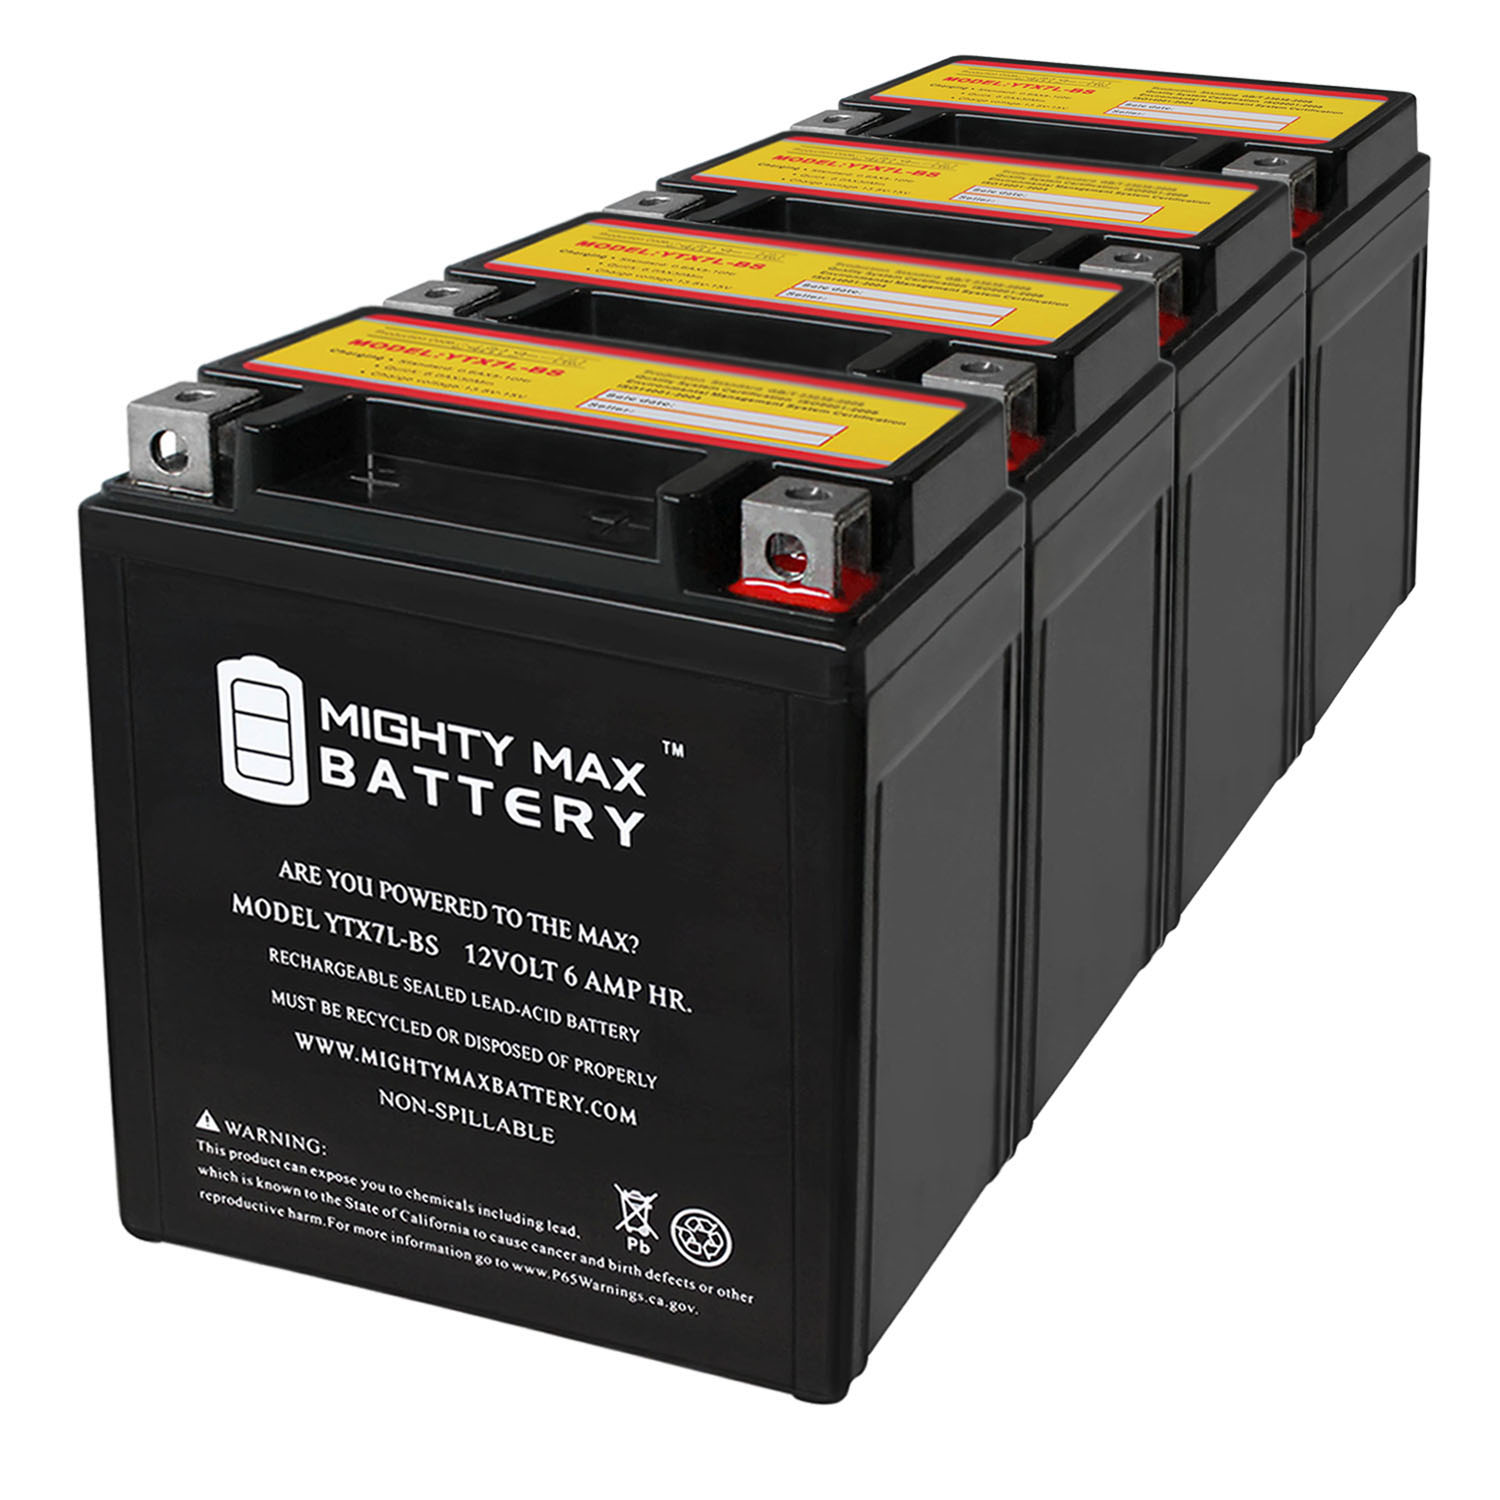 YTX7L-BS 12V 6Ah Replacement Battery Compatible with Power Source GTX7L-BS - 4 Pack